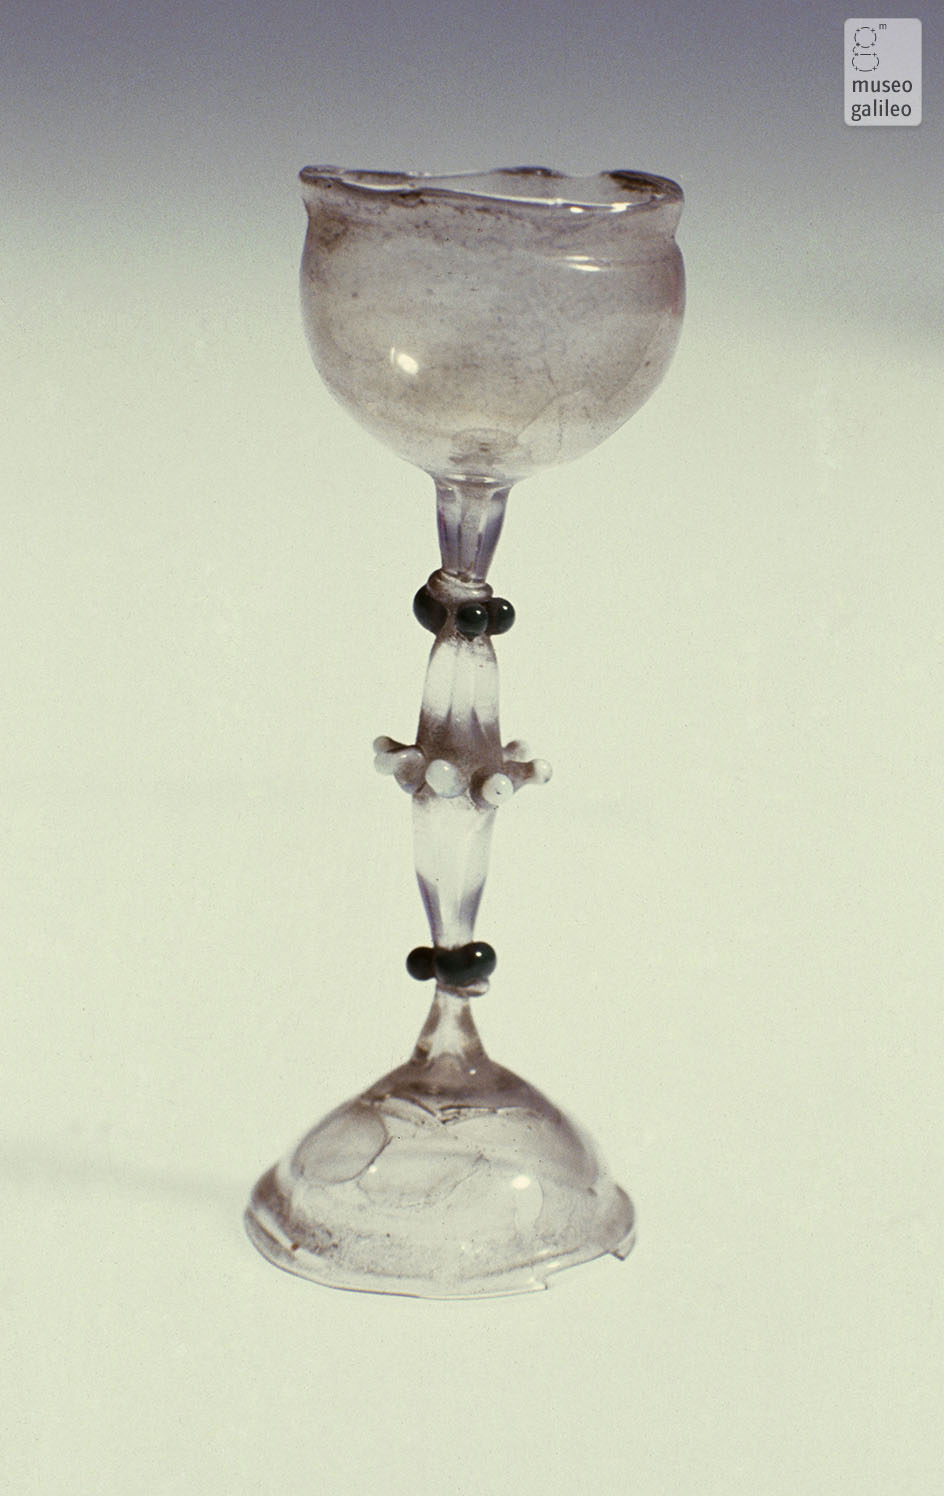 Cups joined by a stem (Inv. 3805)